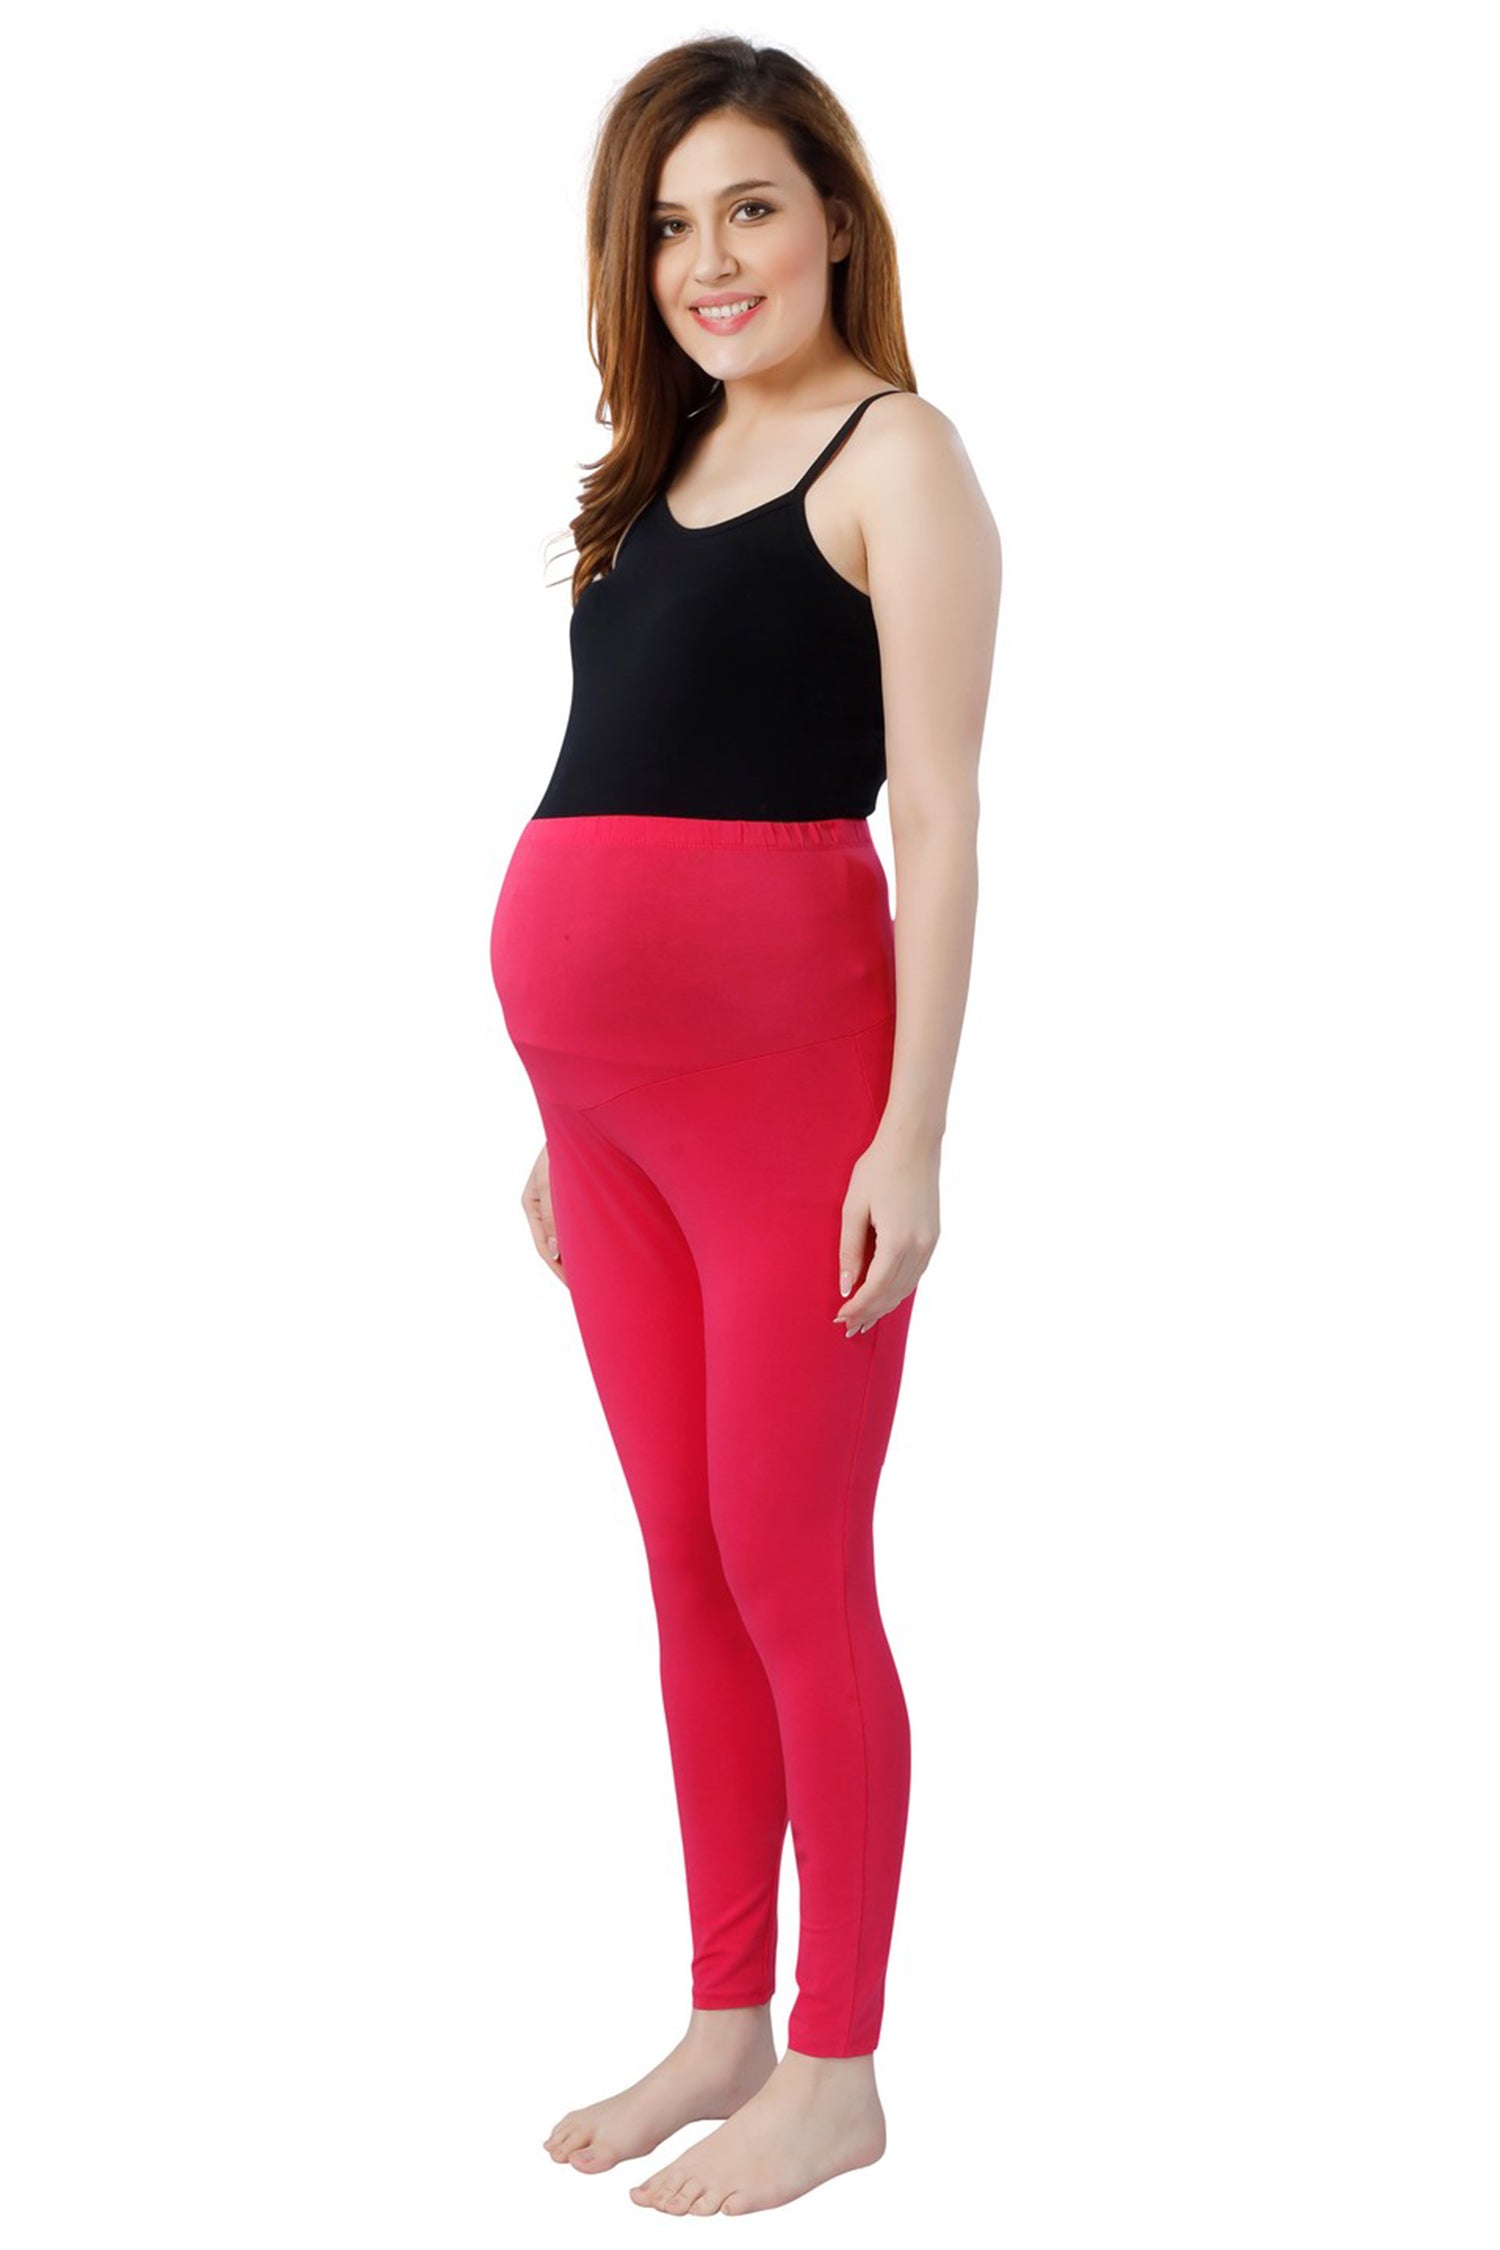 TRASA Women's Maternity Cotton Workout Leggings Over The Belly Pregnancy  Yoga Pants with Pockets - Pink